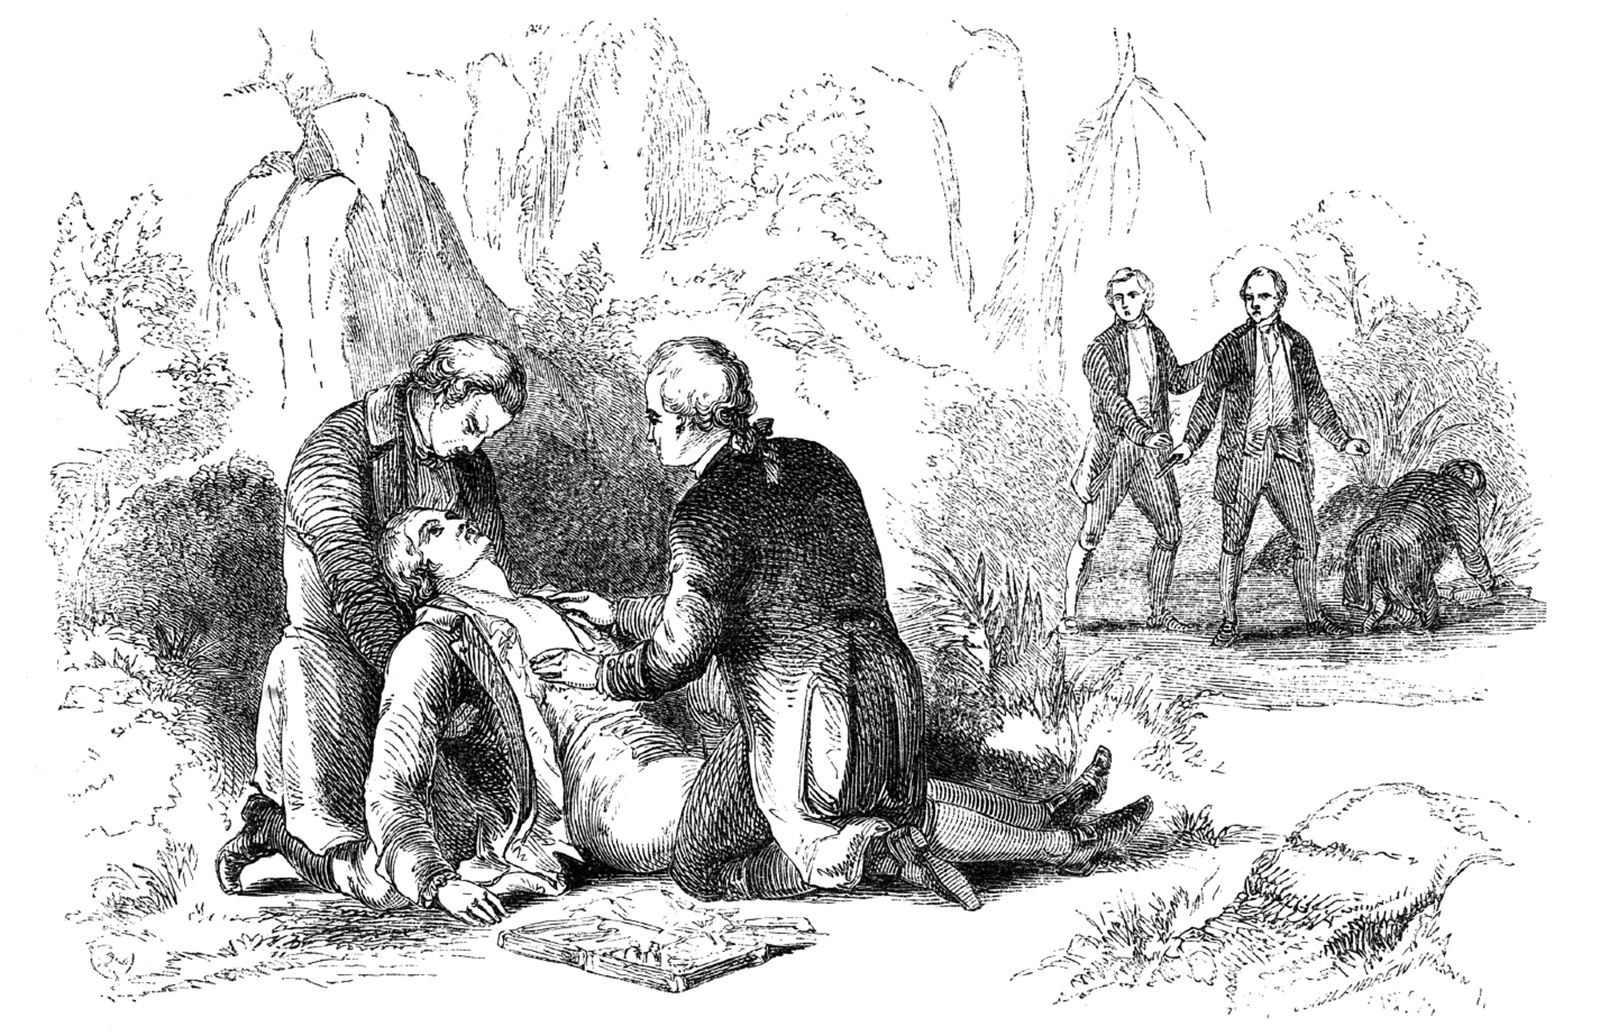 ‘The death of Alexander Hamilton after his duel with Aaron Burr’; nineteenth-century engraving